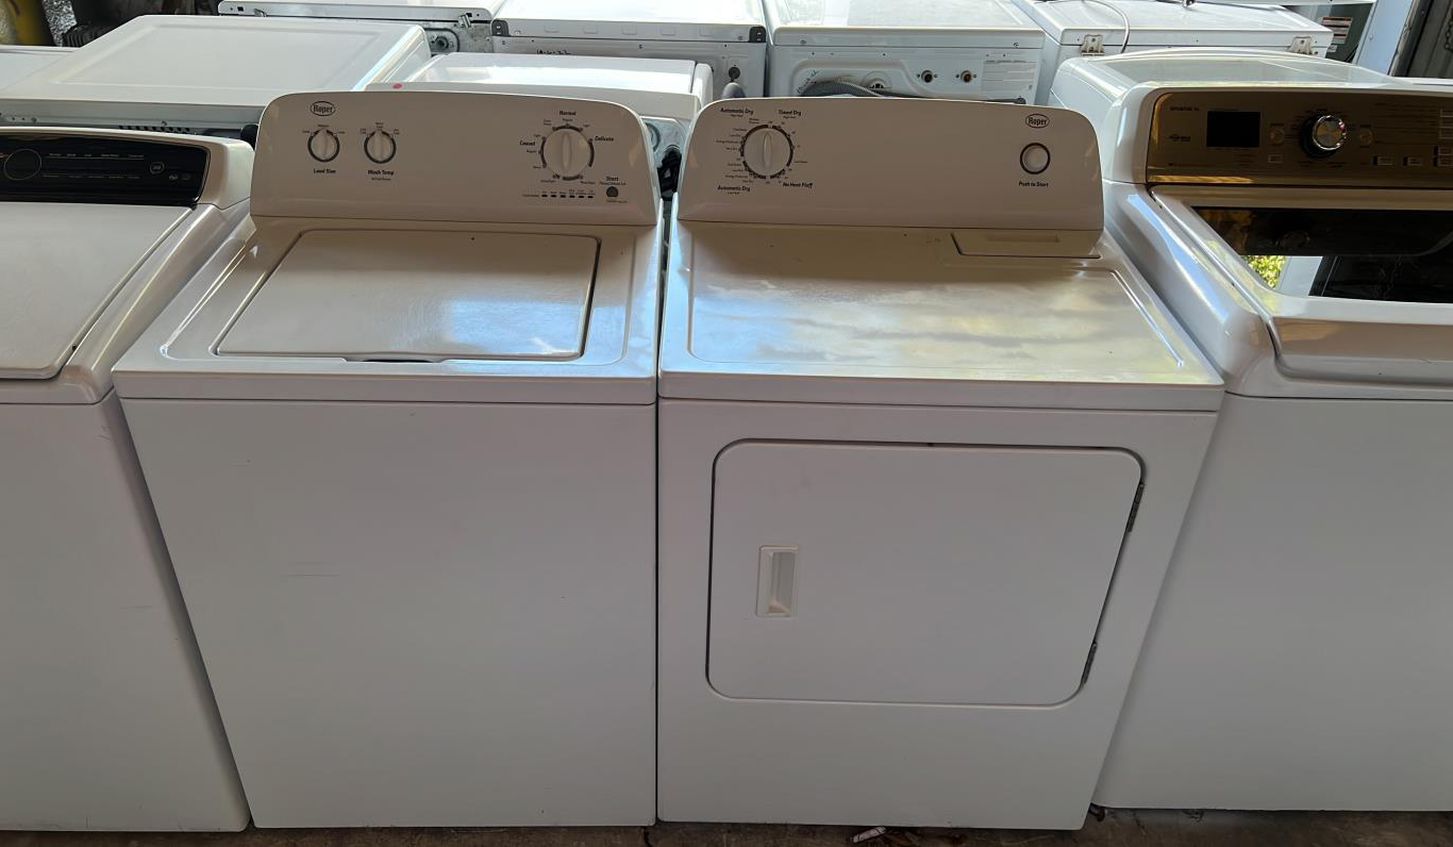 Roper Washer & Dryer Electric White Very Quiet
